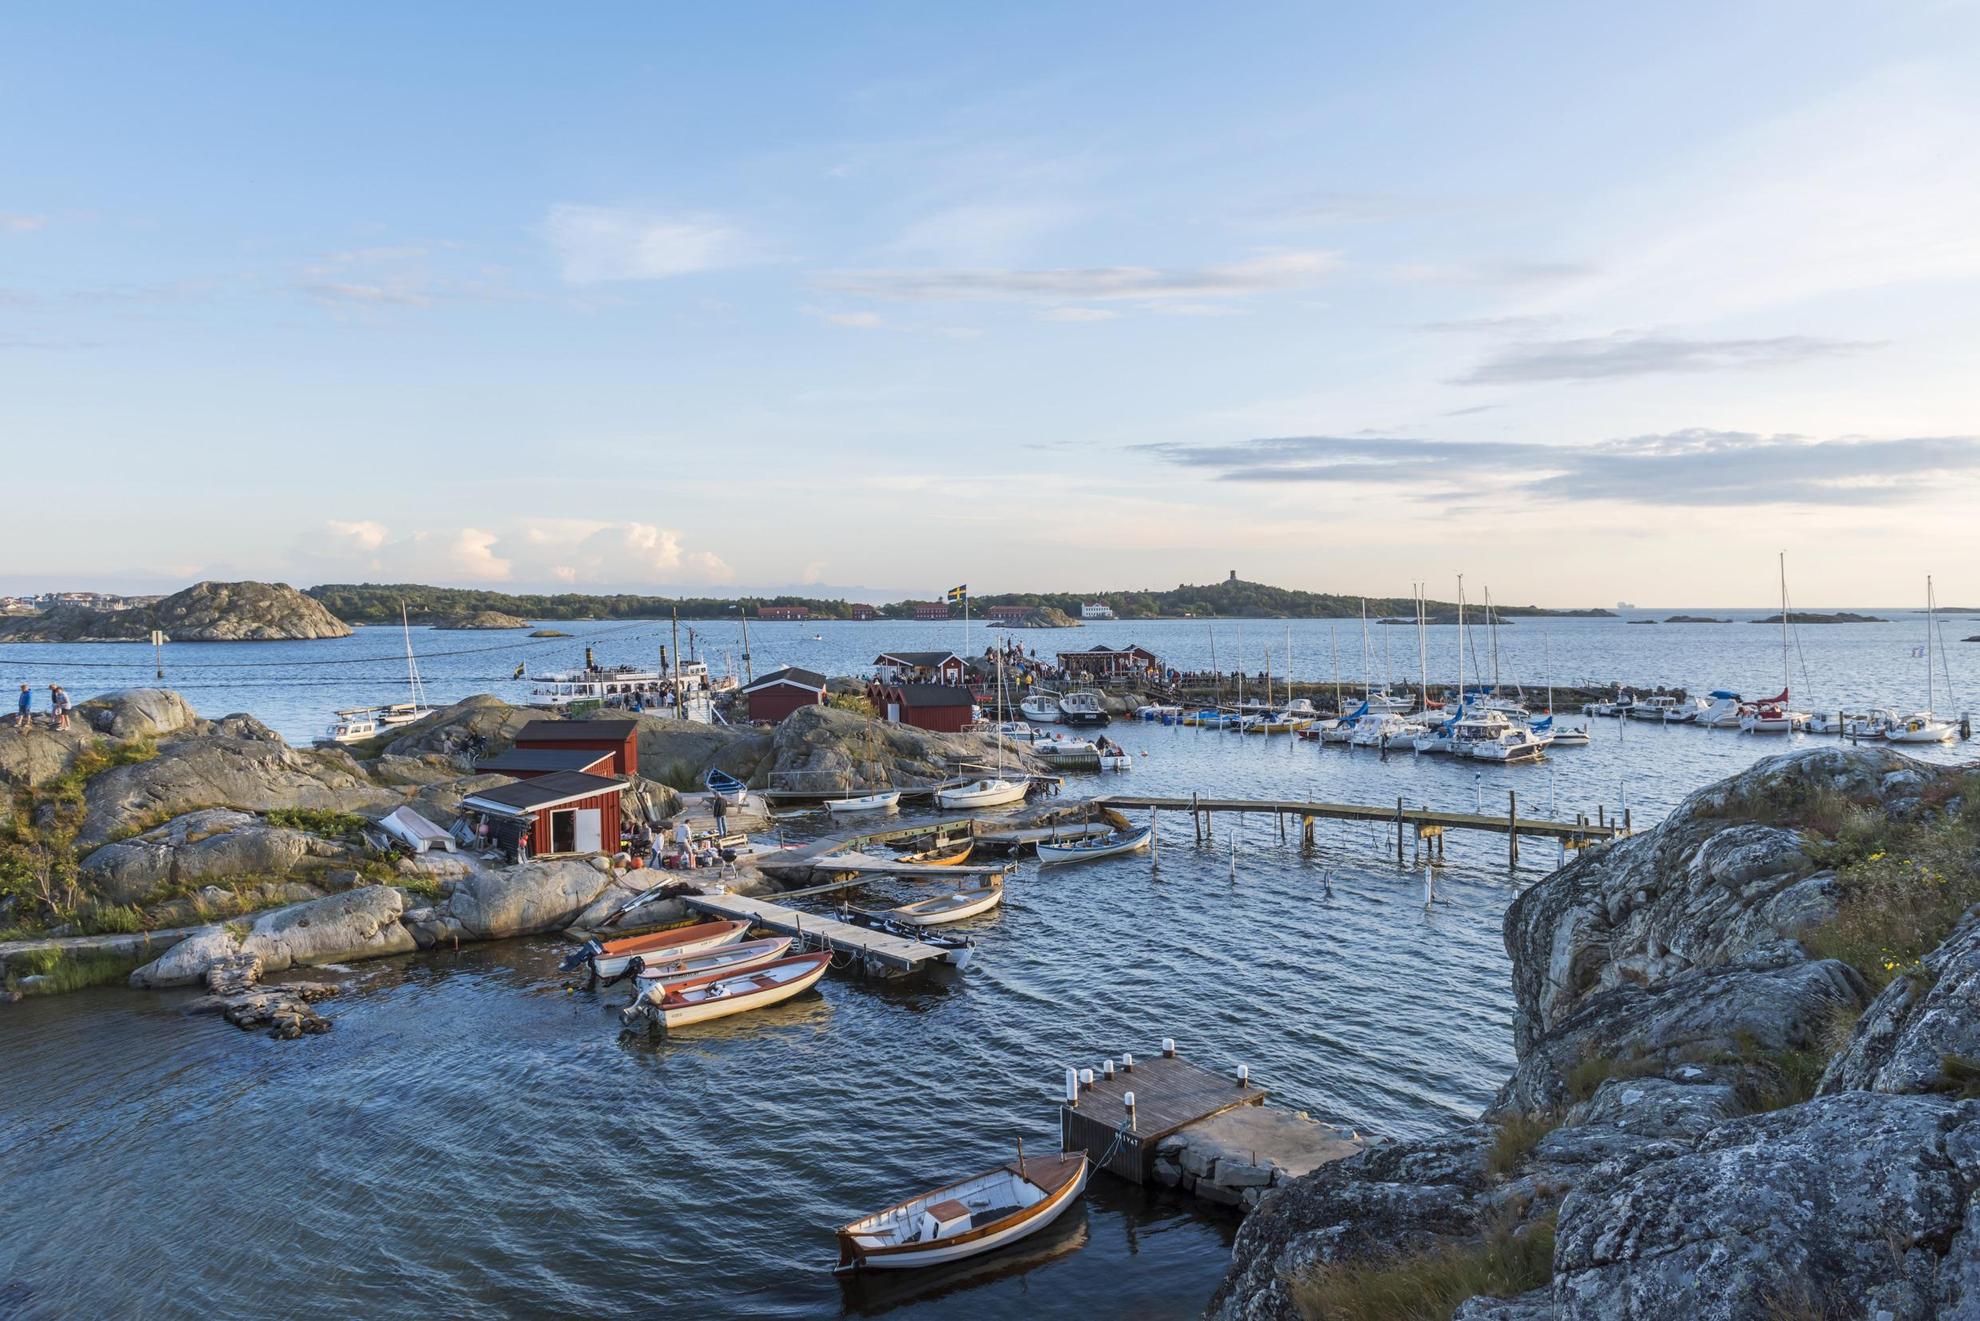 A small marina between some cliffs in the archipelago. Small motor boats and sail boats are at the docks and there are several small boat houses on the cliffs.